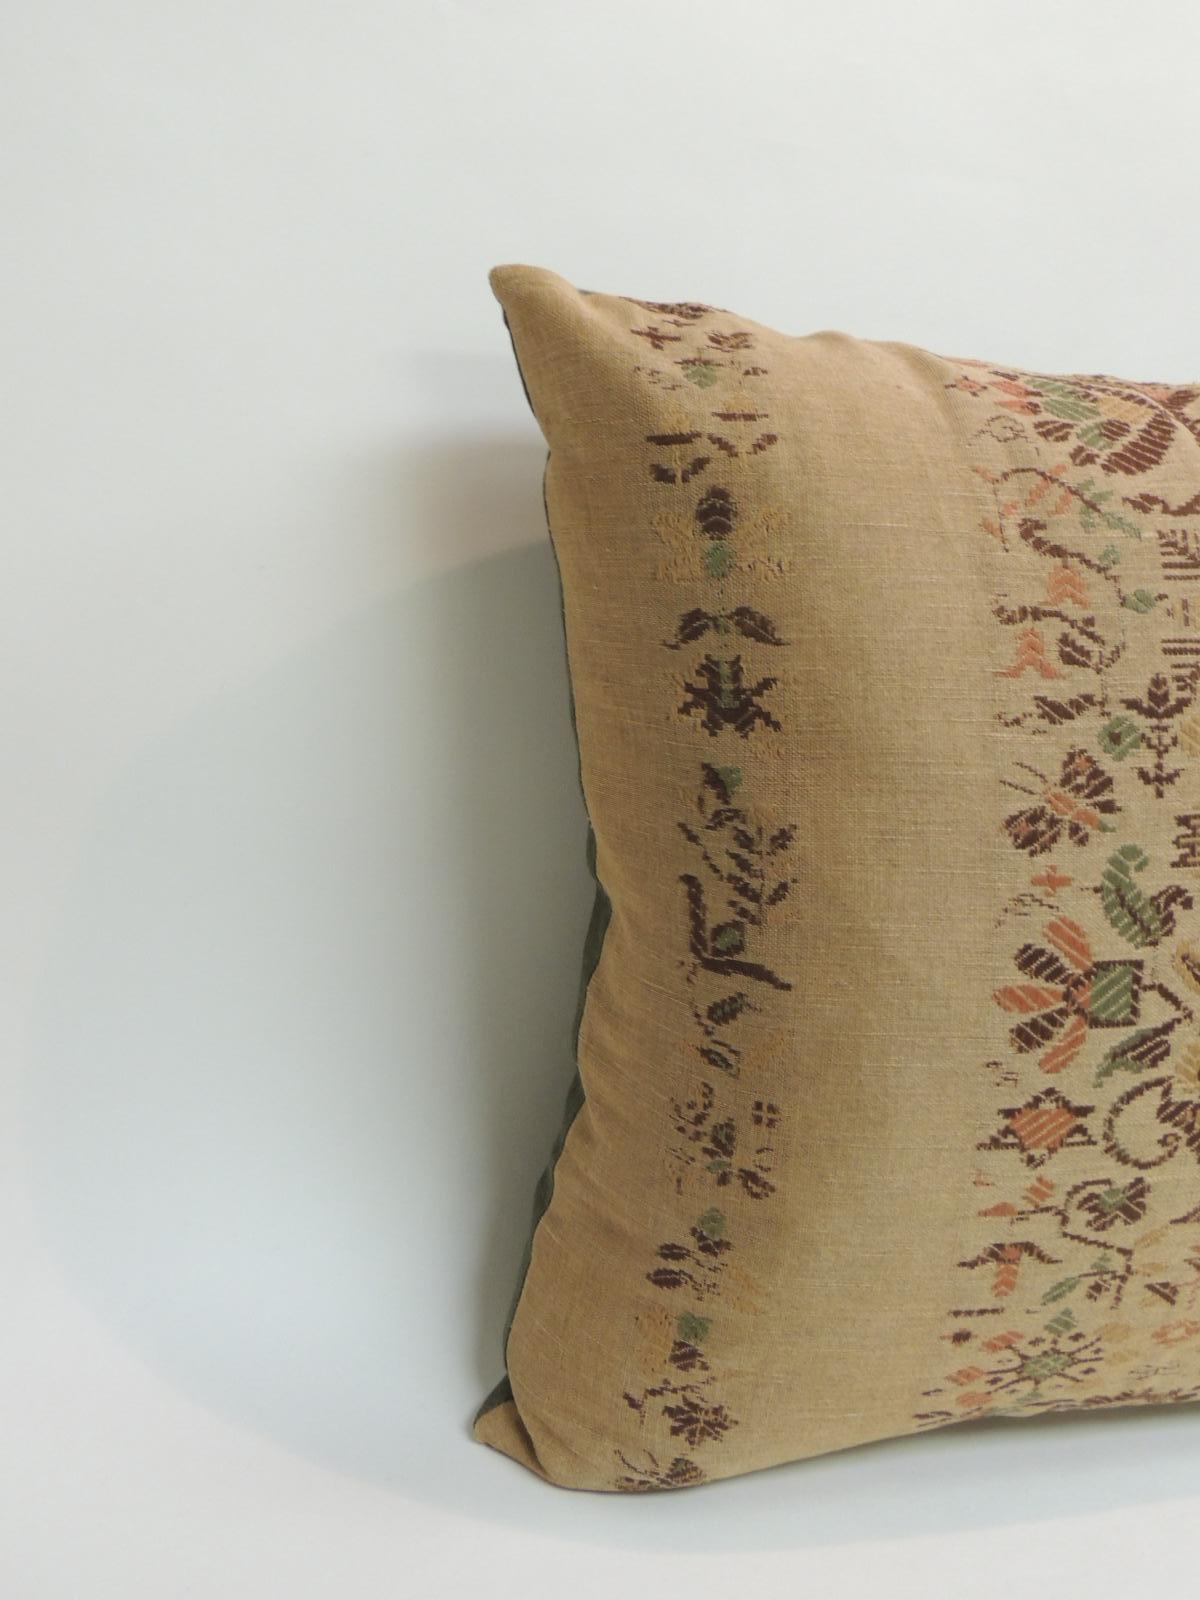 Linen Arts & Crafts pillow, depicting flowers and baskets. In shades of brown, green, gold, orange and pink. Green linen backing.
Decorative pillow handcrafted and designed in the USA. Closure by stitch (no zipper closure) with custom-made pillow